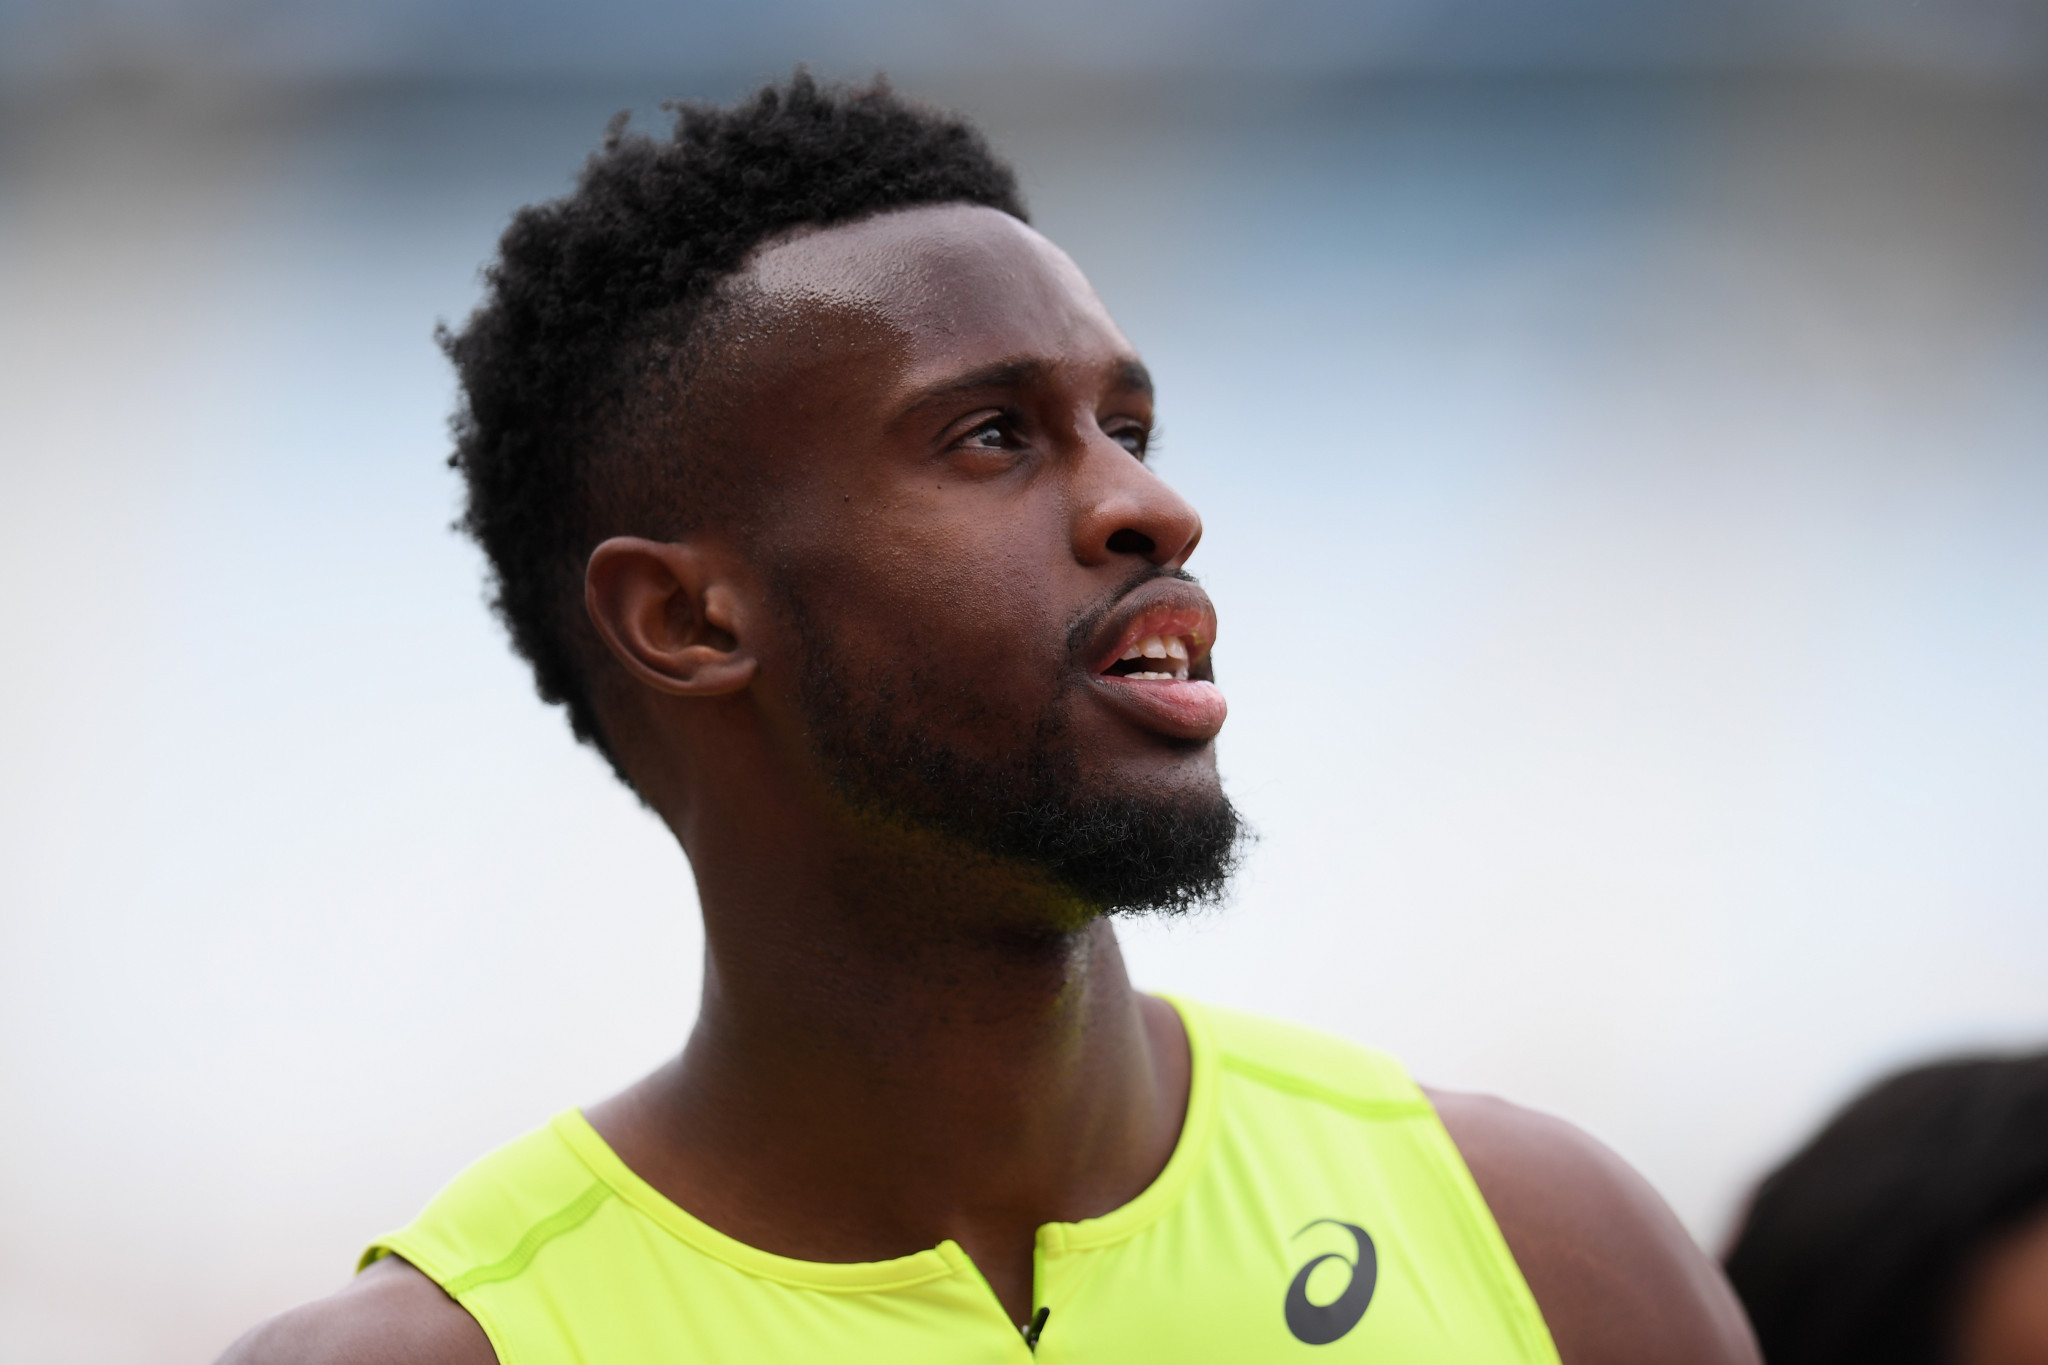 American long jumper Lawson suspended by Athletics Integrity Unit for drug failure